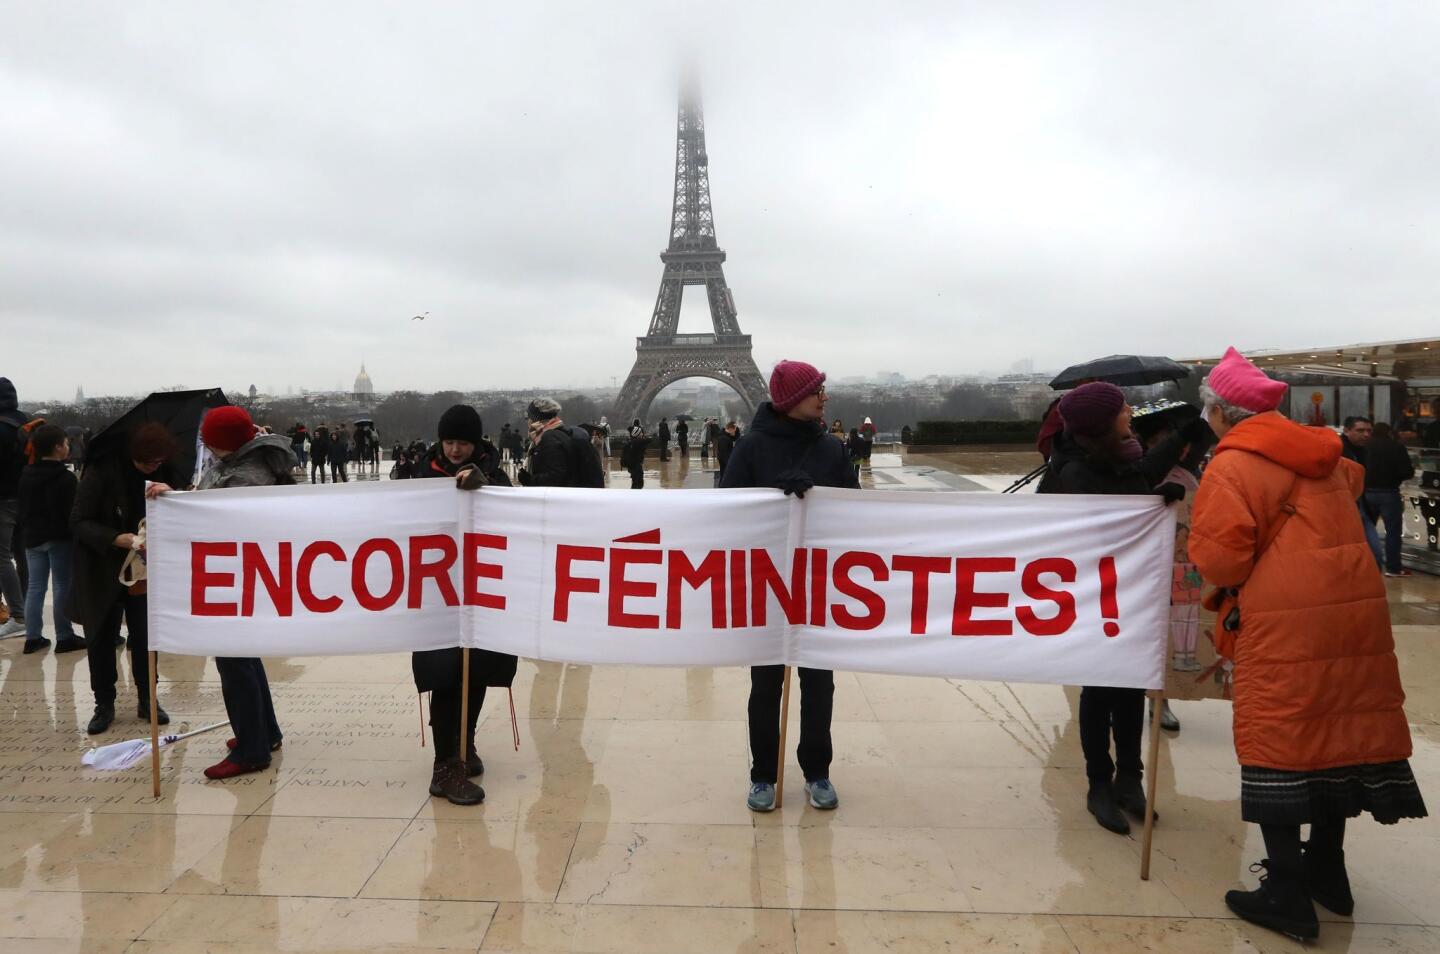 Women hold a banner reading "still feminist" with the Eiffel tower in background on the Trocadero esplanade in Paris on Jan. 21, 2018, during a women's march organized as part of a global day of protests, a year to the day since Donald Trump took office as US president.